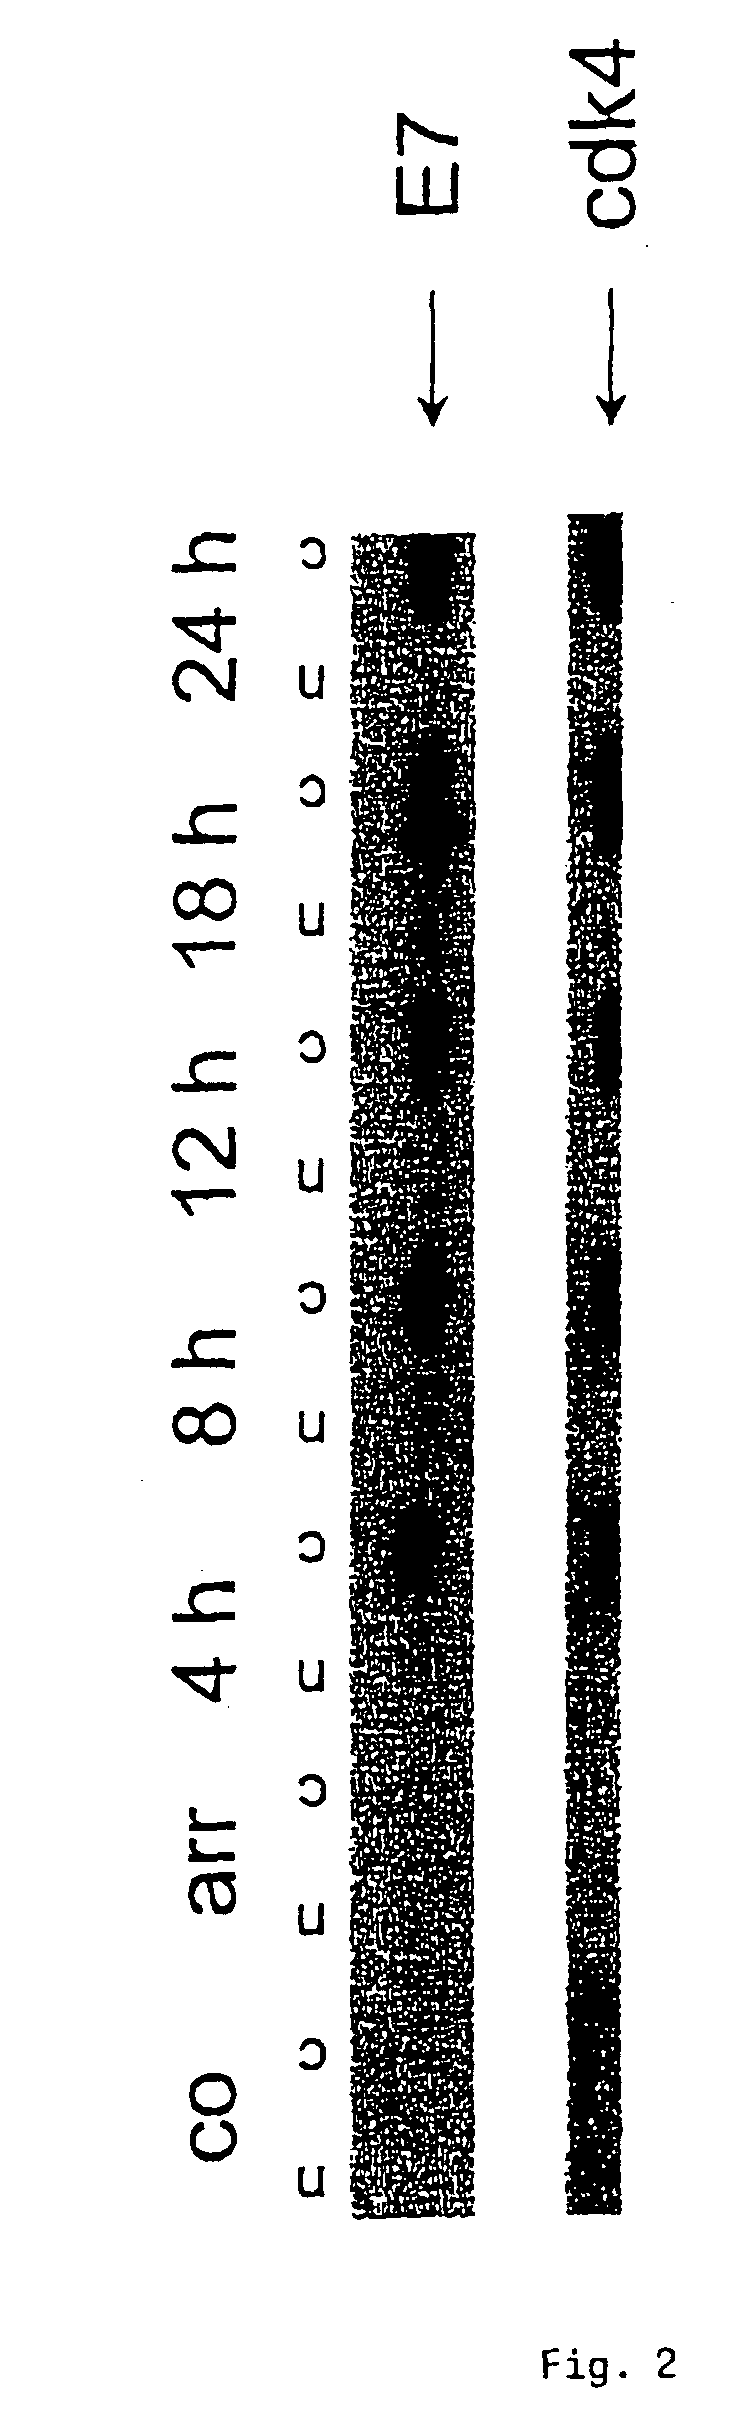 Method for detecting carcinomas in a solubilized cervical body sample